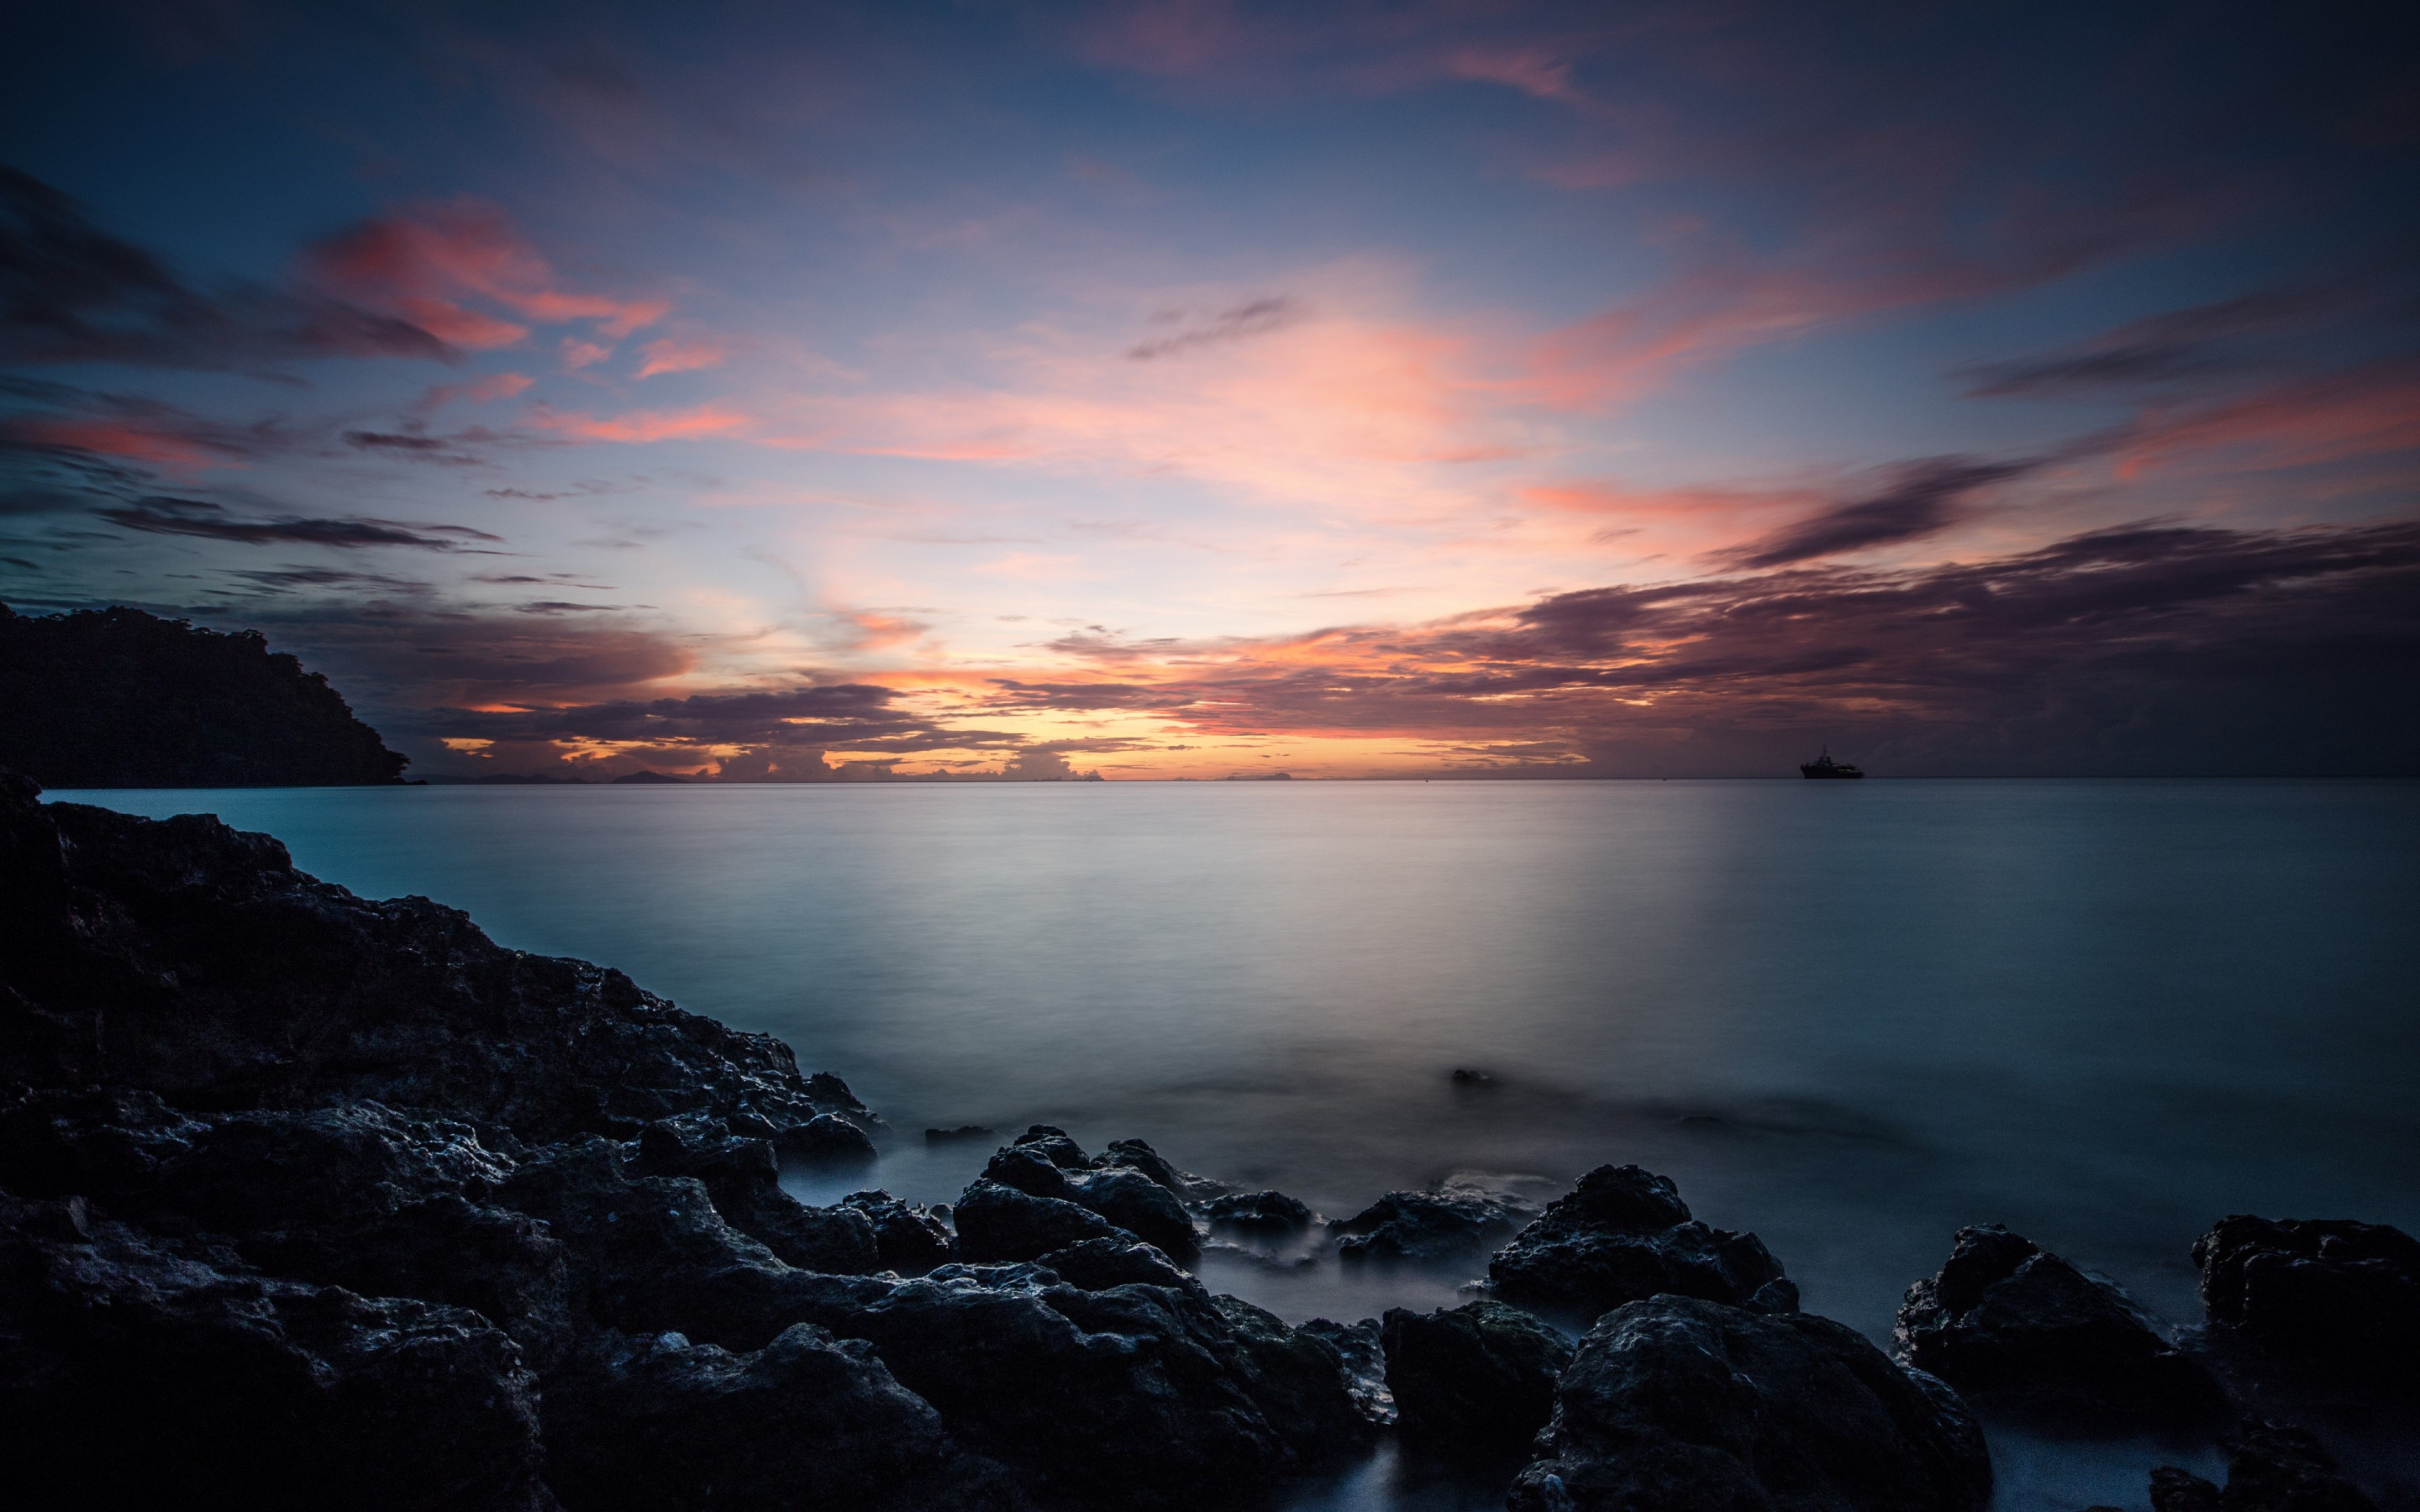 Sunset, rocks, clouds, view from Thailand wallpaper 2880x1800